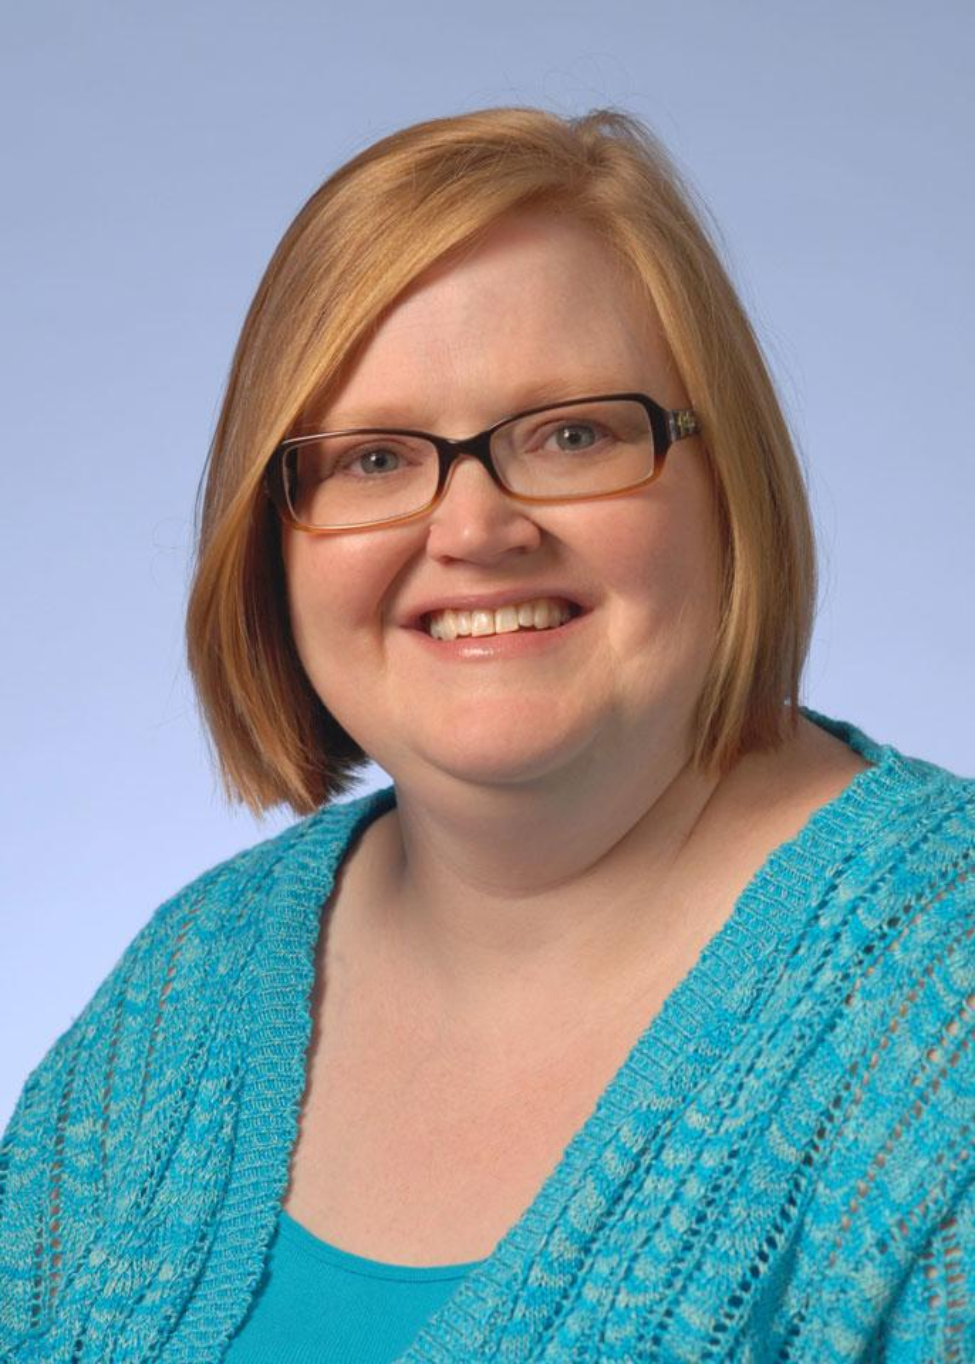 Stacey Crane, PhD, RN, is an assistant professor in the Department of Research at Cizik School of Nursing at UTHealth. (Photo by: Cizik School of Nursing)